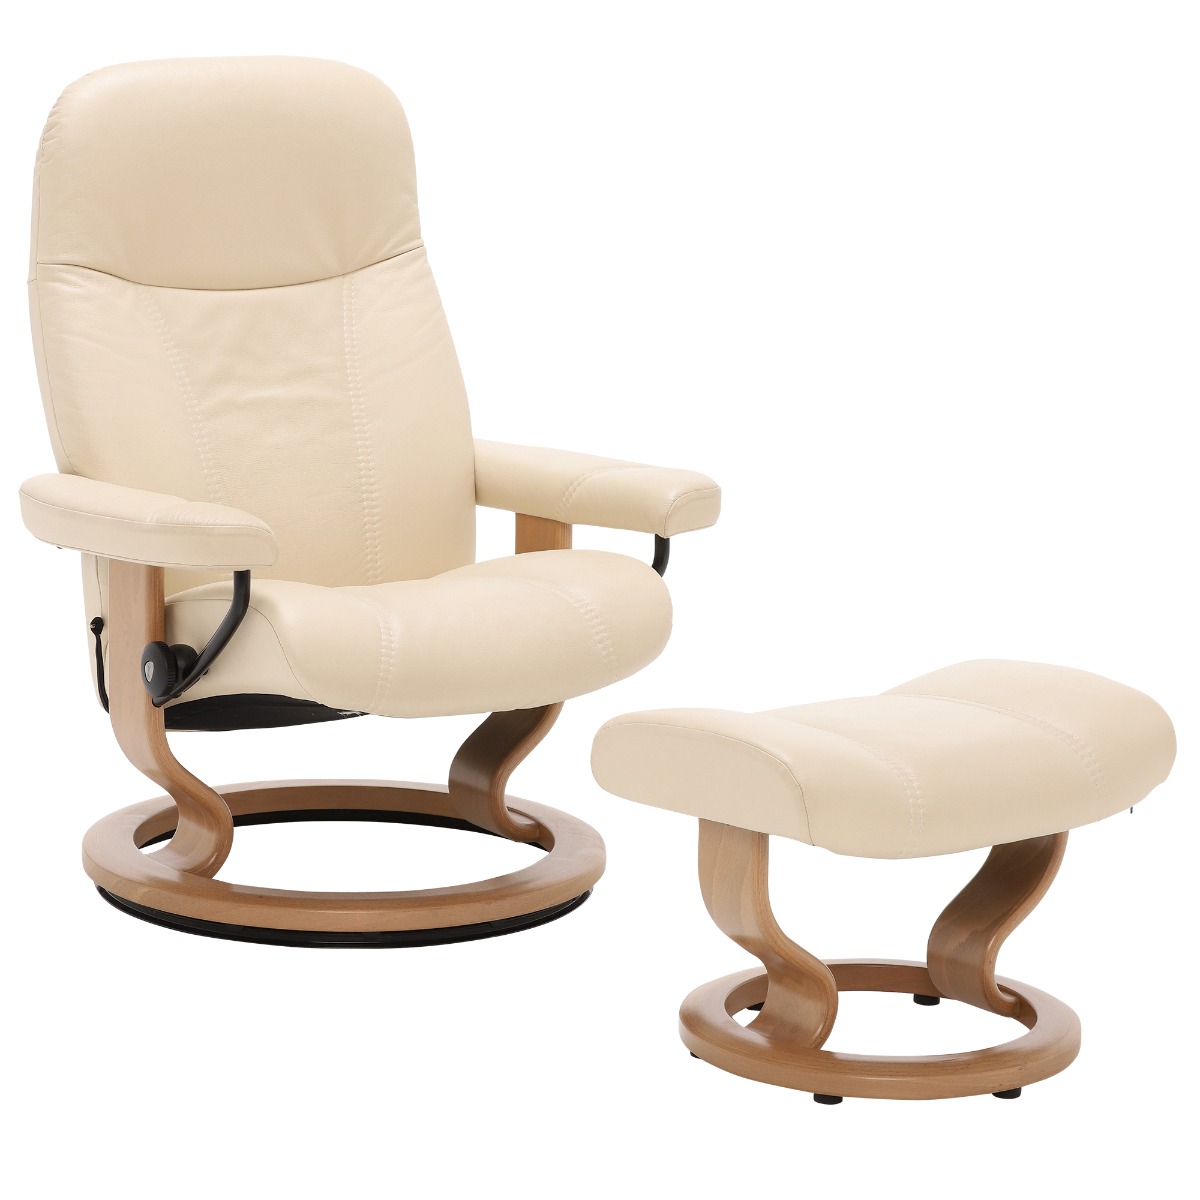 Stressless Consul Small Recliner Chair & Stool, Neutral Leather | Barker & Stonehouse